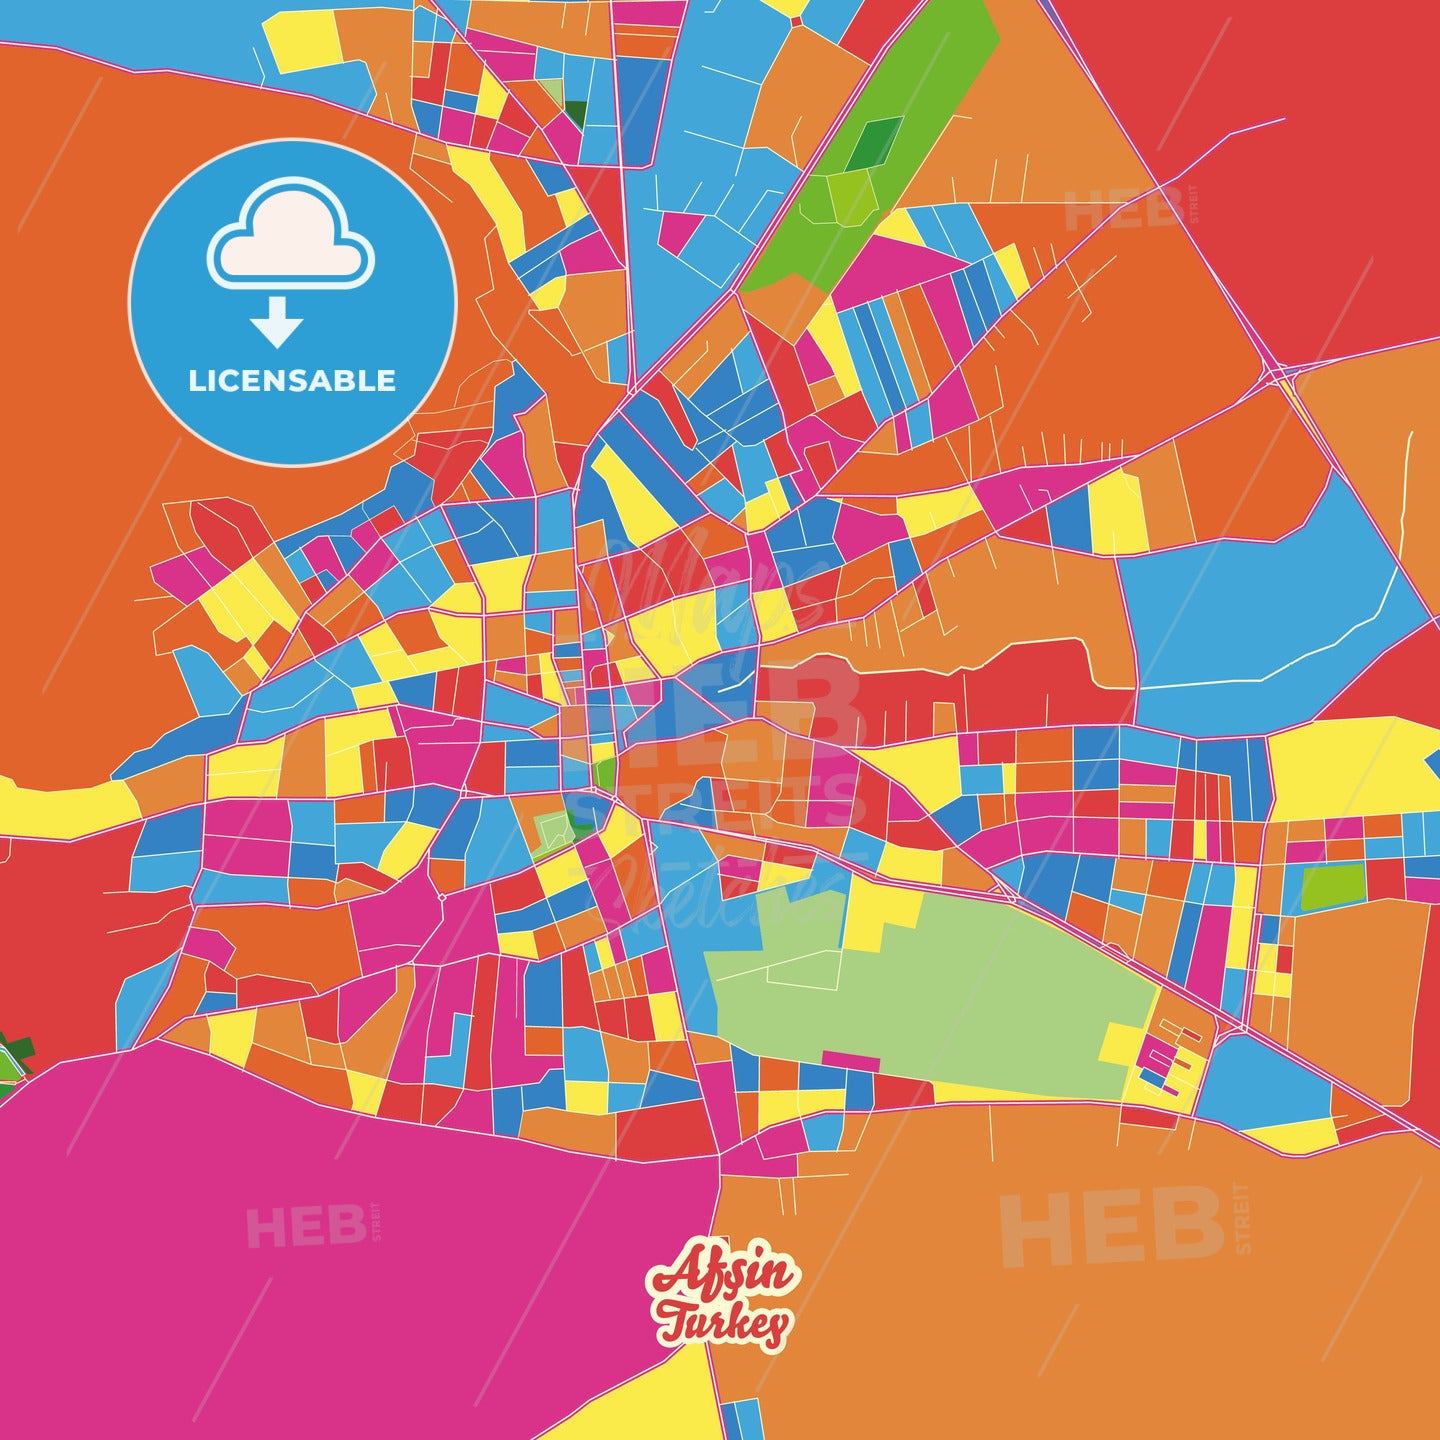 Afşin, Turkey Crazy Colorful Street Map Poster Template - HEBSTREITS Sketches